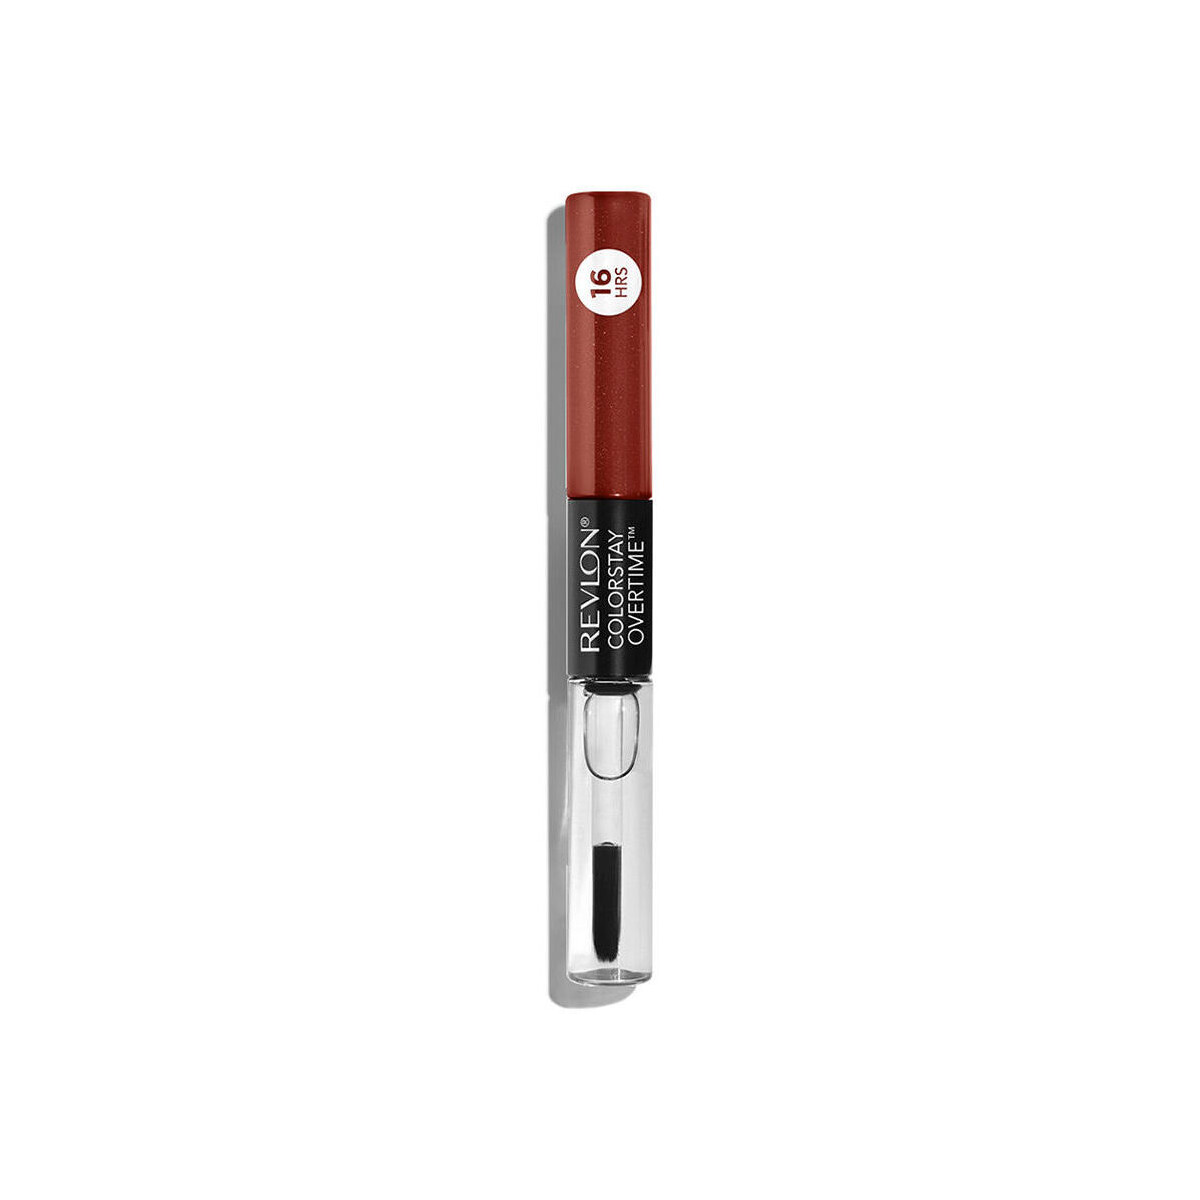 Bellezza Donna Rossetti Revlon Colorstay Overtime Lipcolor 20-constantly Coral 